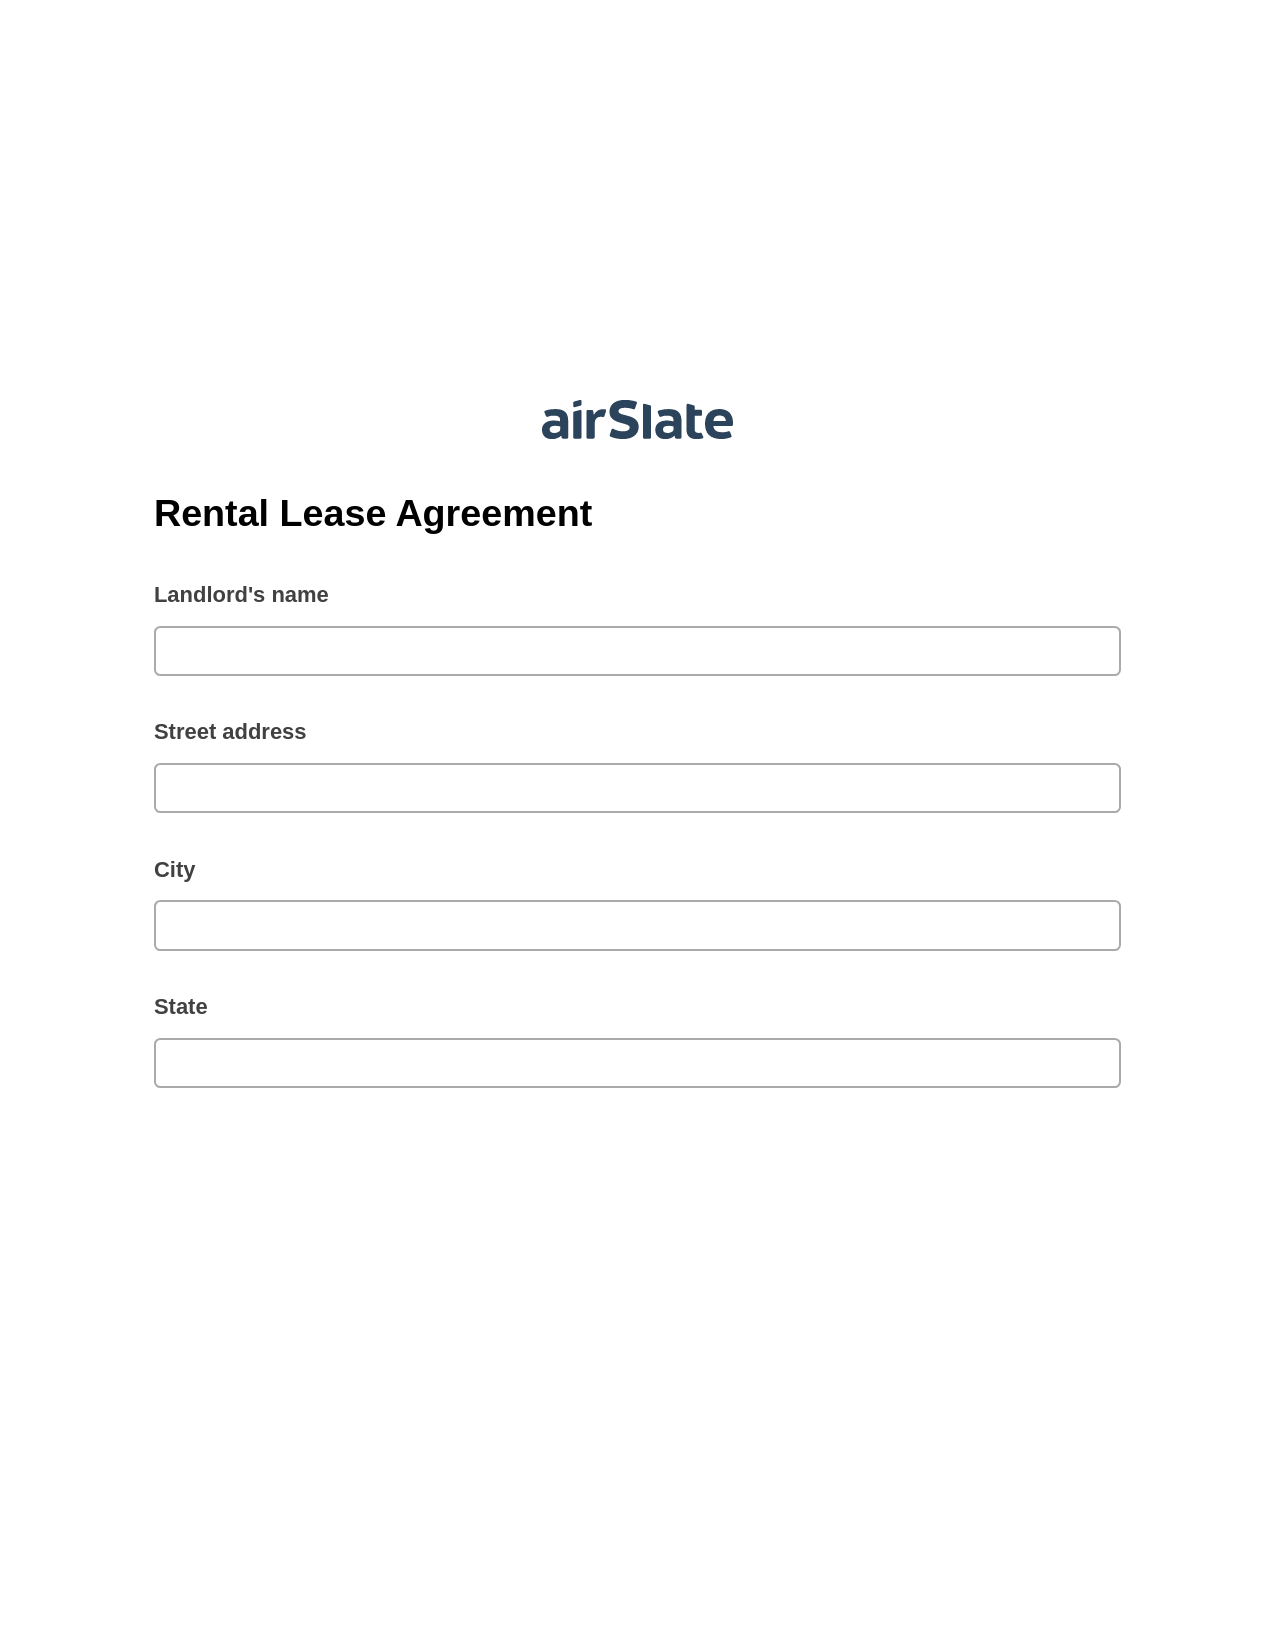 Multirole Rental Lease Agreement Pre-fill from Google Sheet Dropdown Options Bot, Update NetSuite Records Bot, Export to NetSuite Record Bot